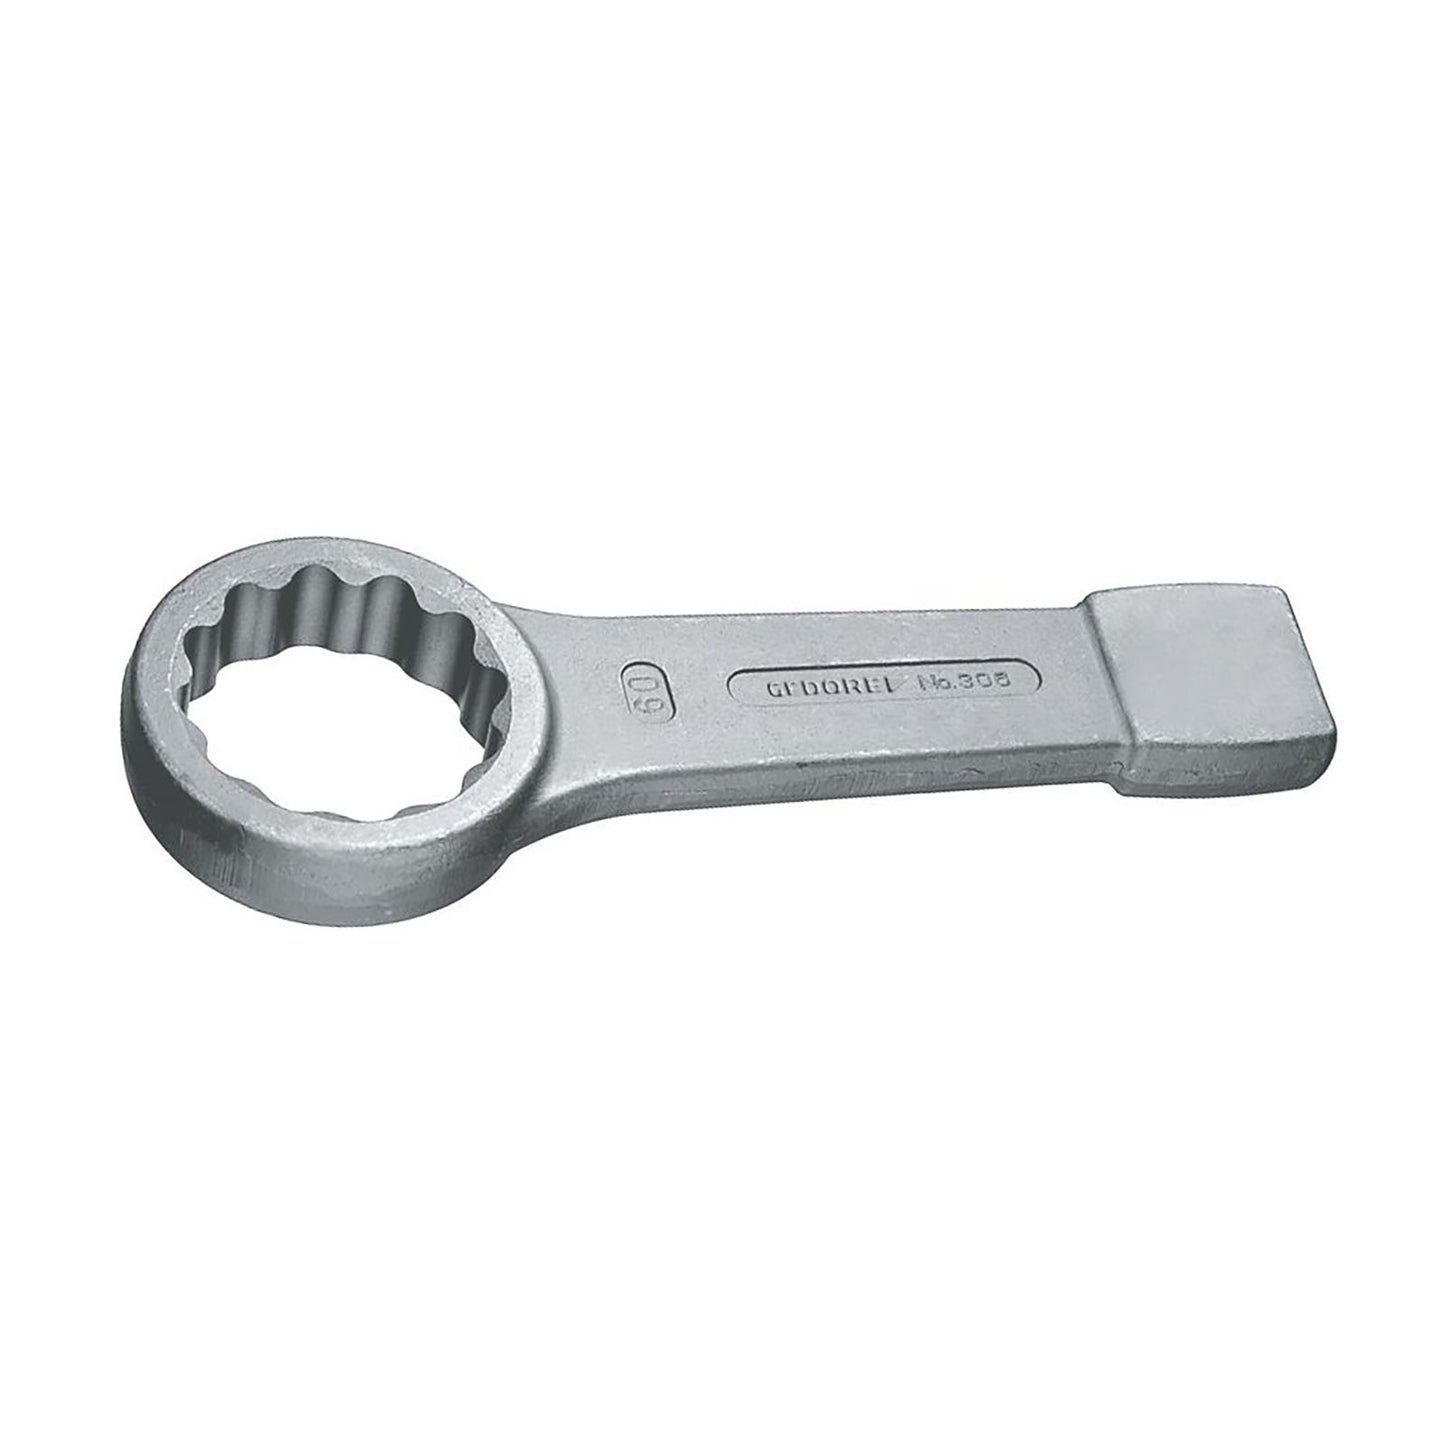 GEDORE 306 110 - Closed Strike Wrench, 110mm (6477050)